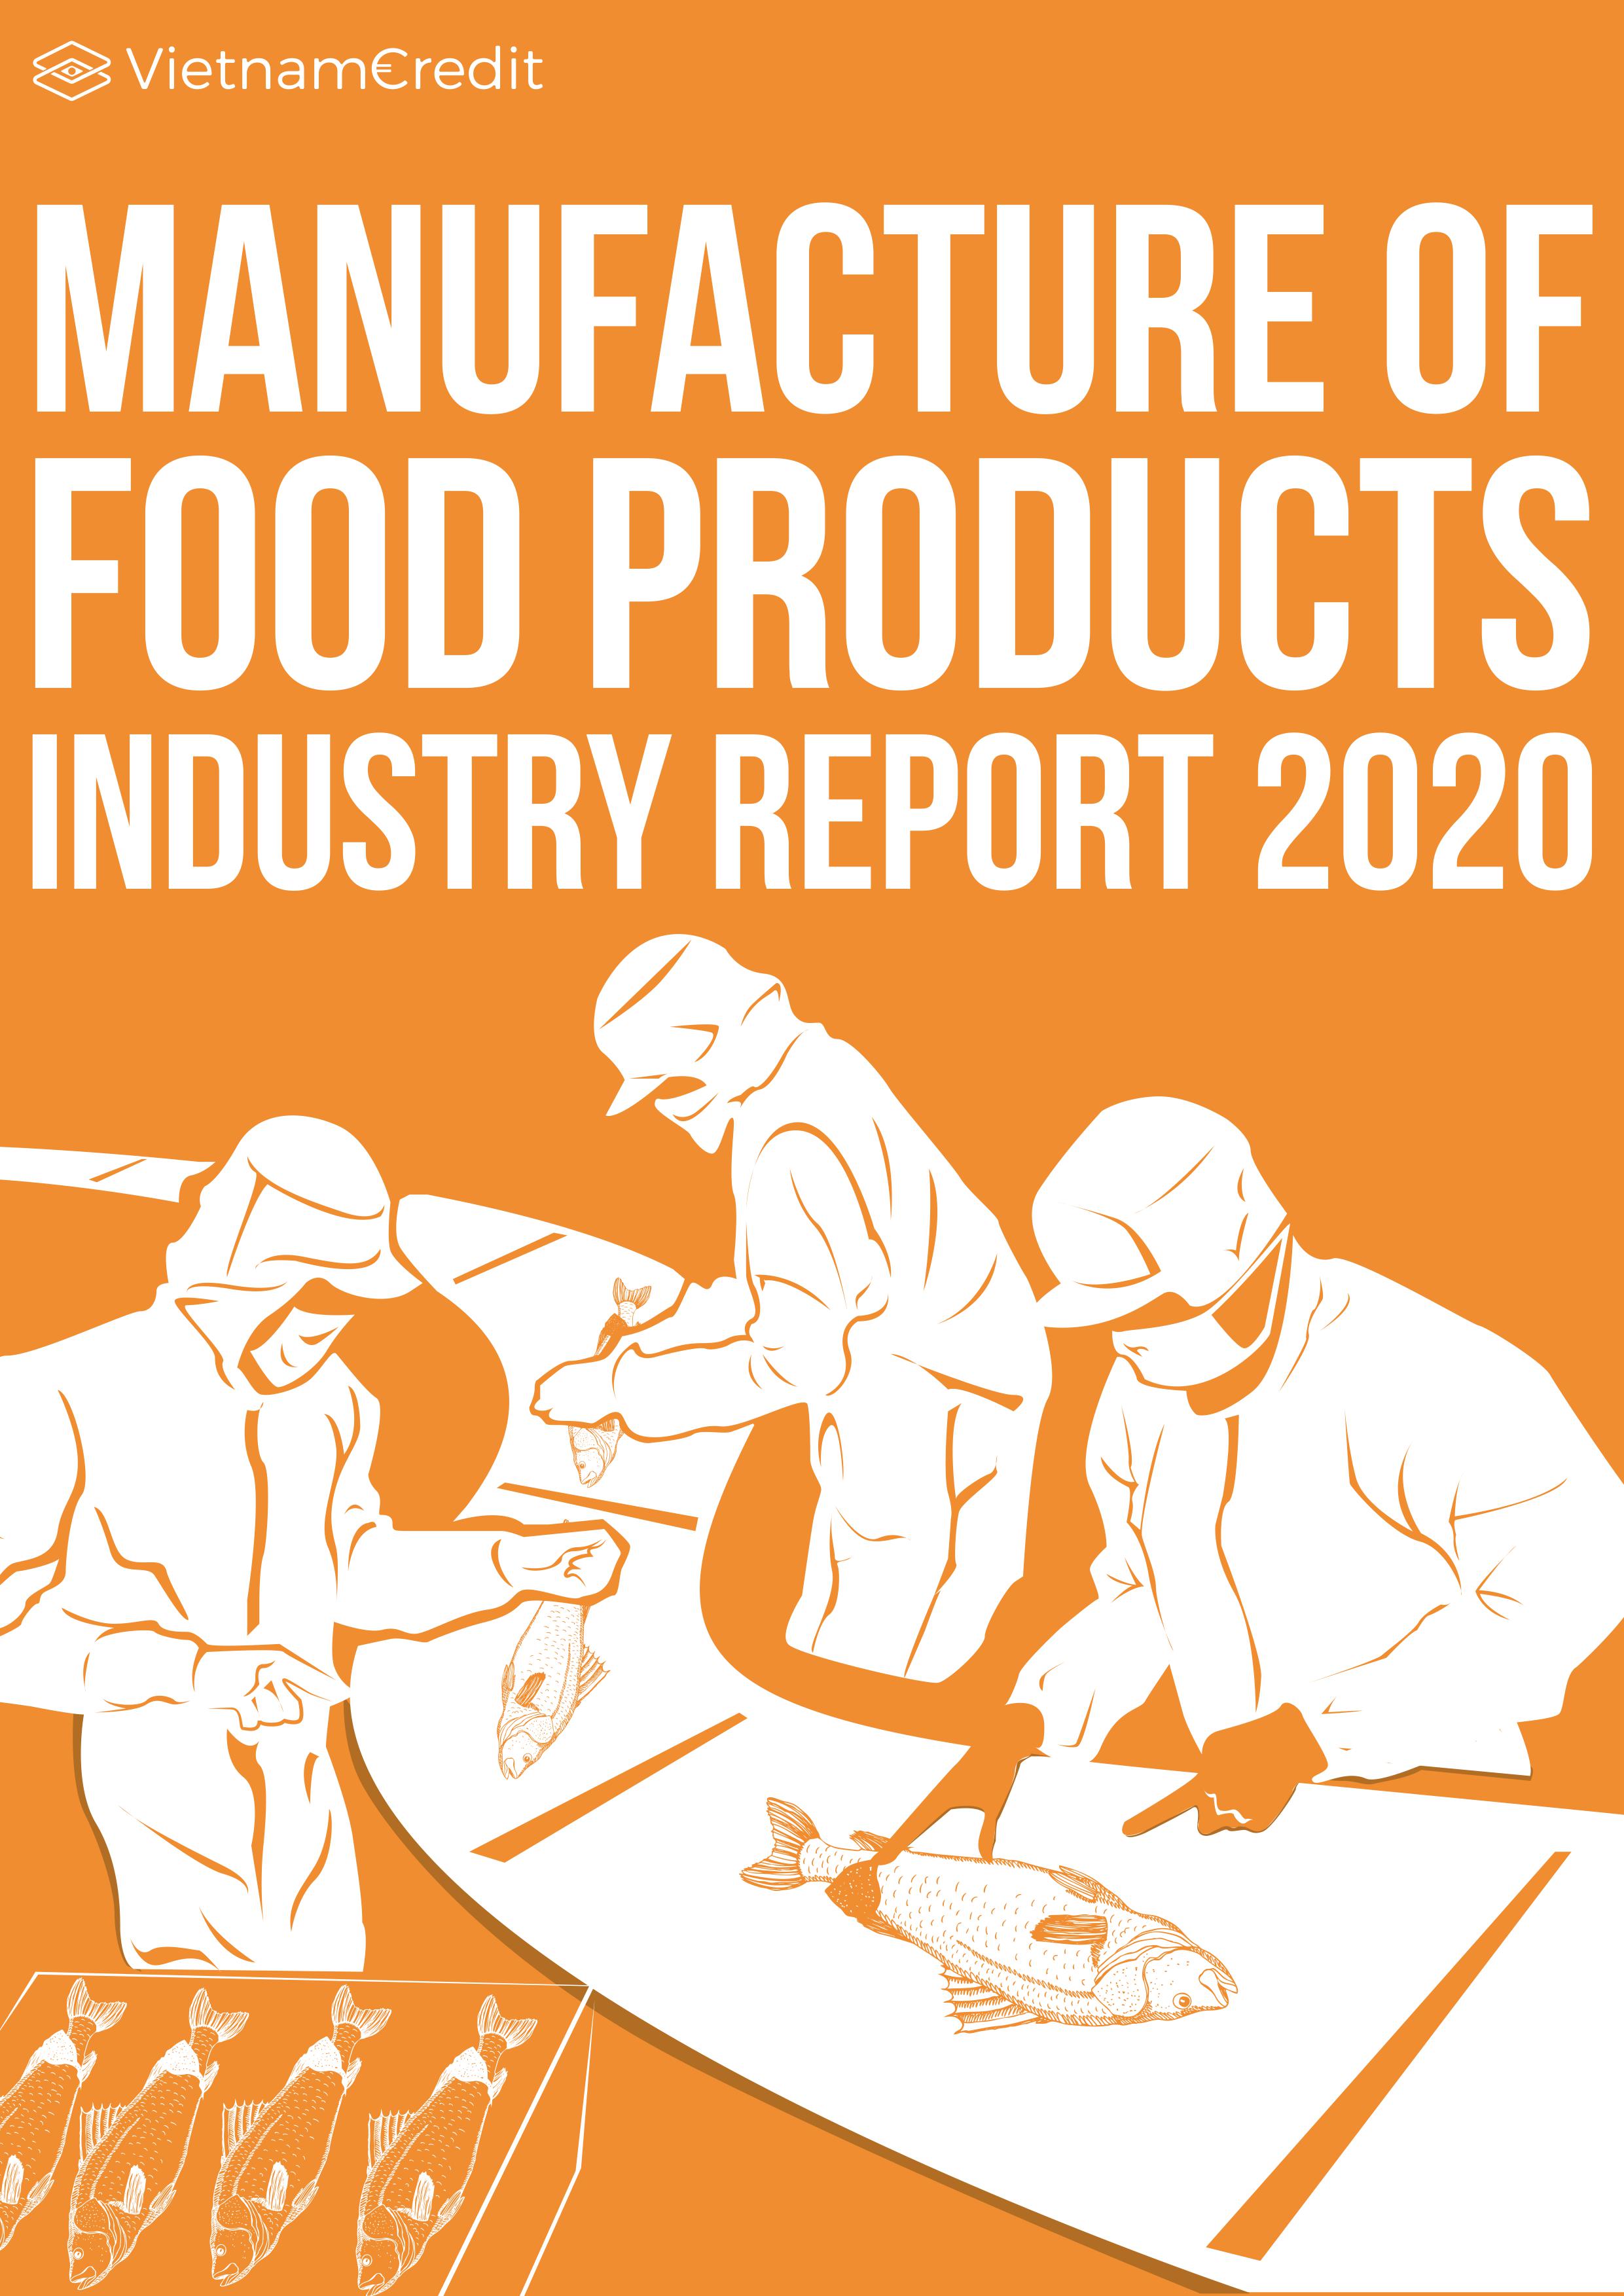 Vietnam Manufacture of Food Products Industry Report 2020